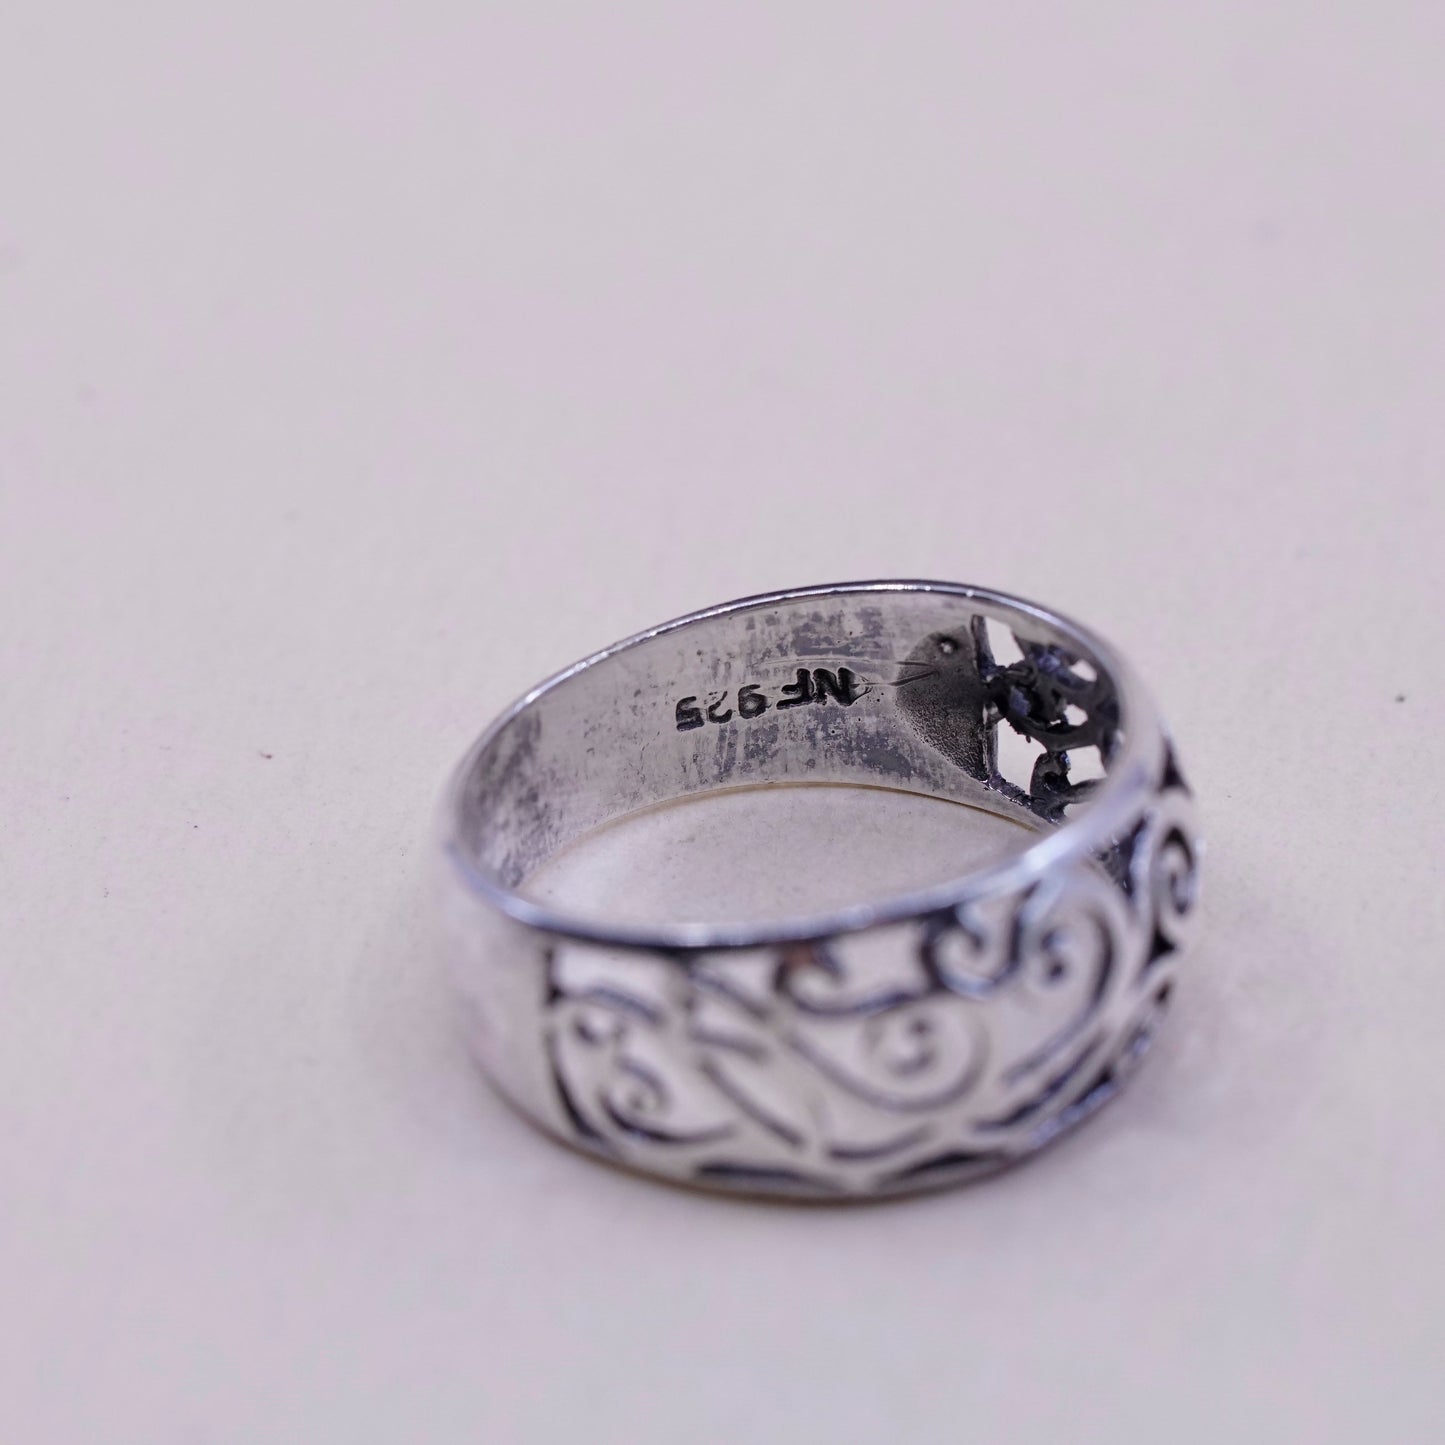 Size 7, vintage sterling silver handmade ring, 925 whirl filigree band